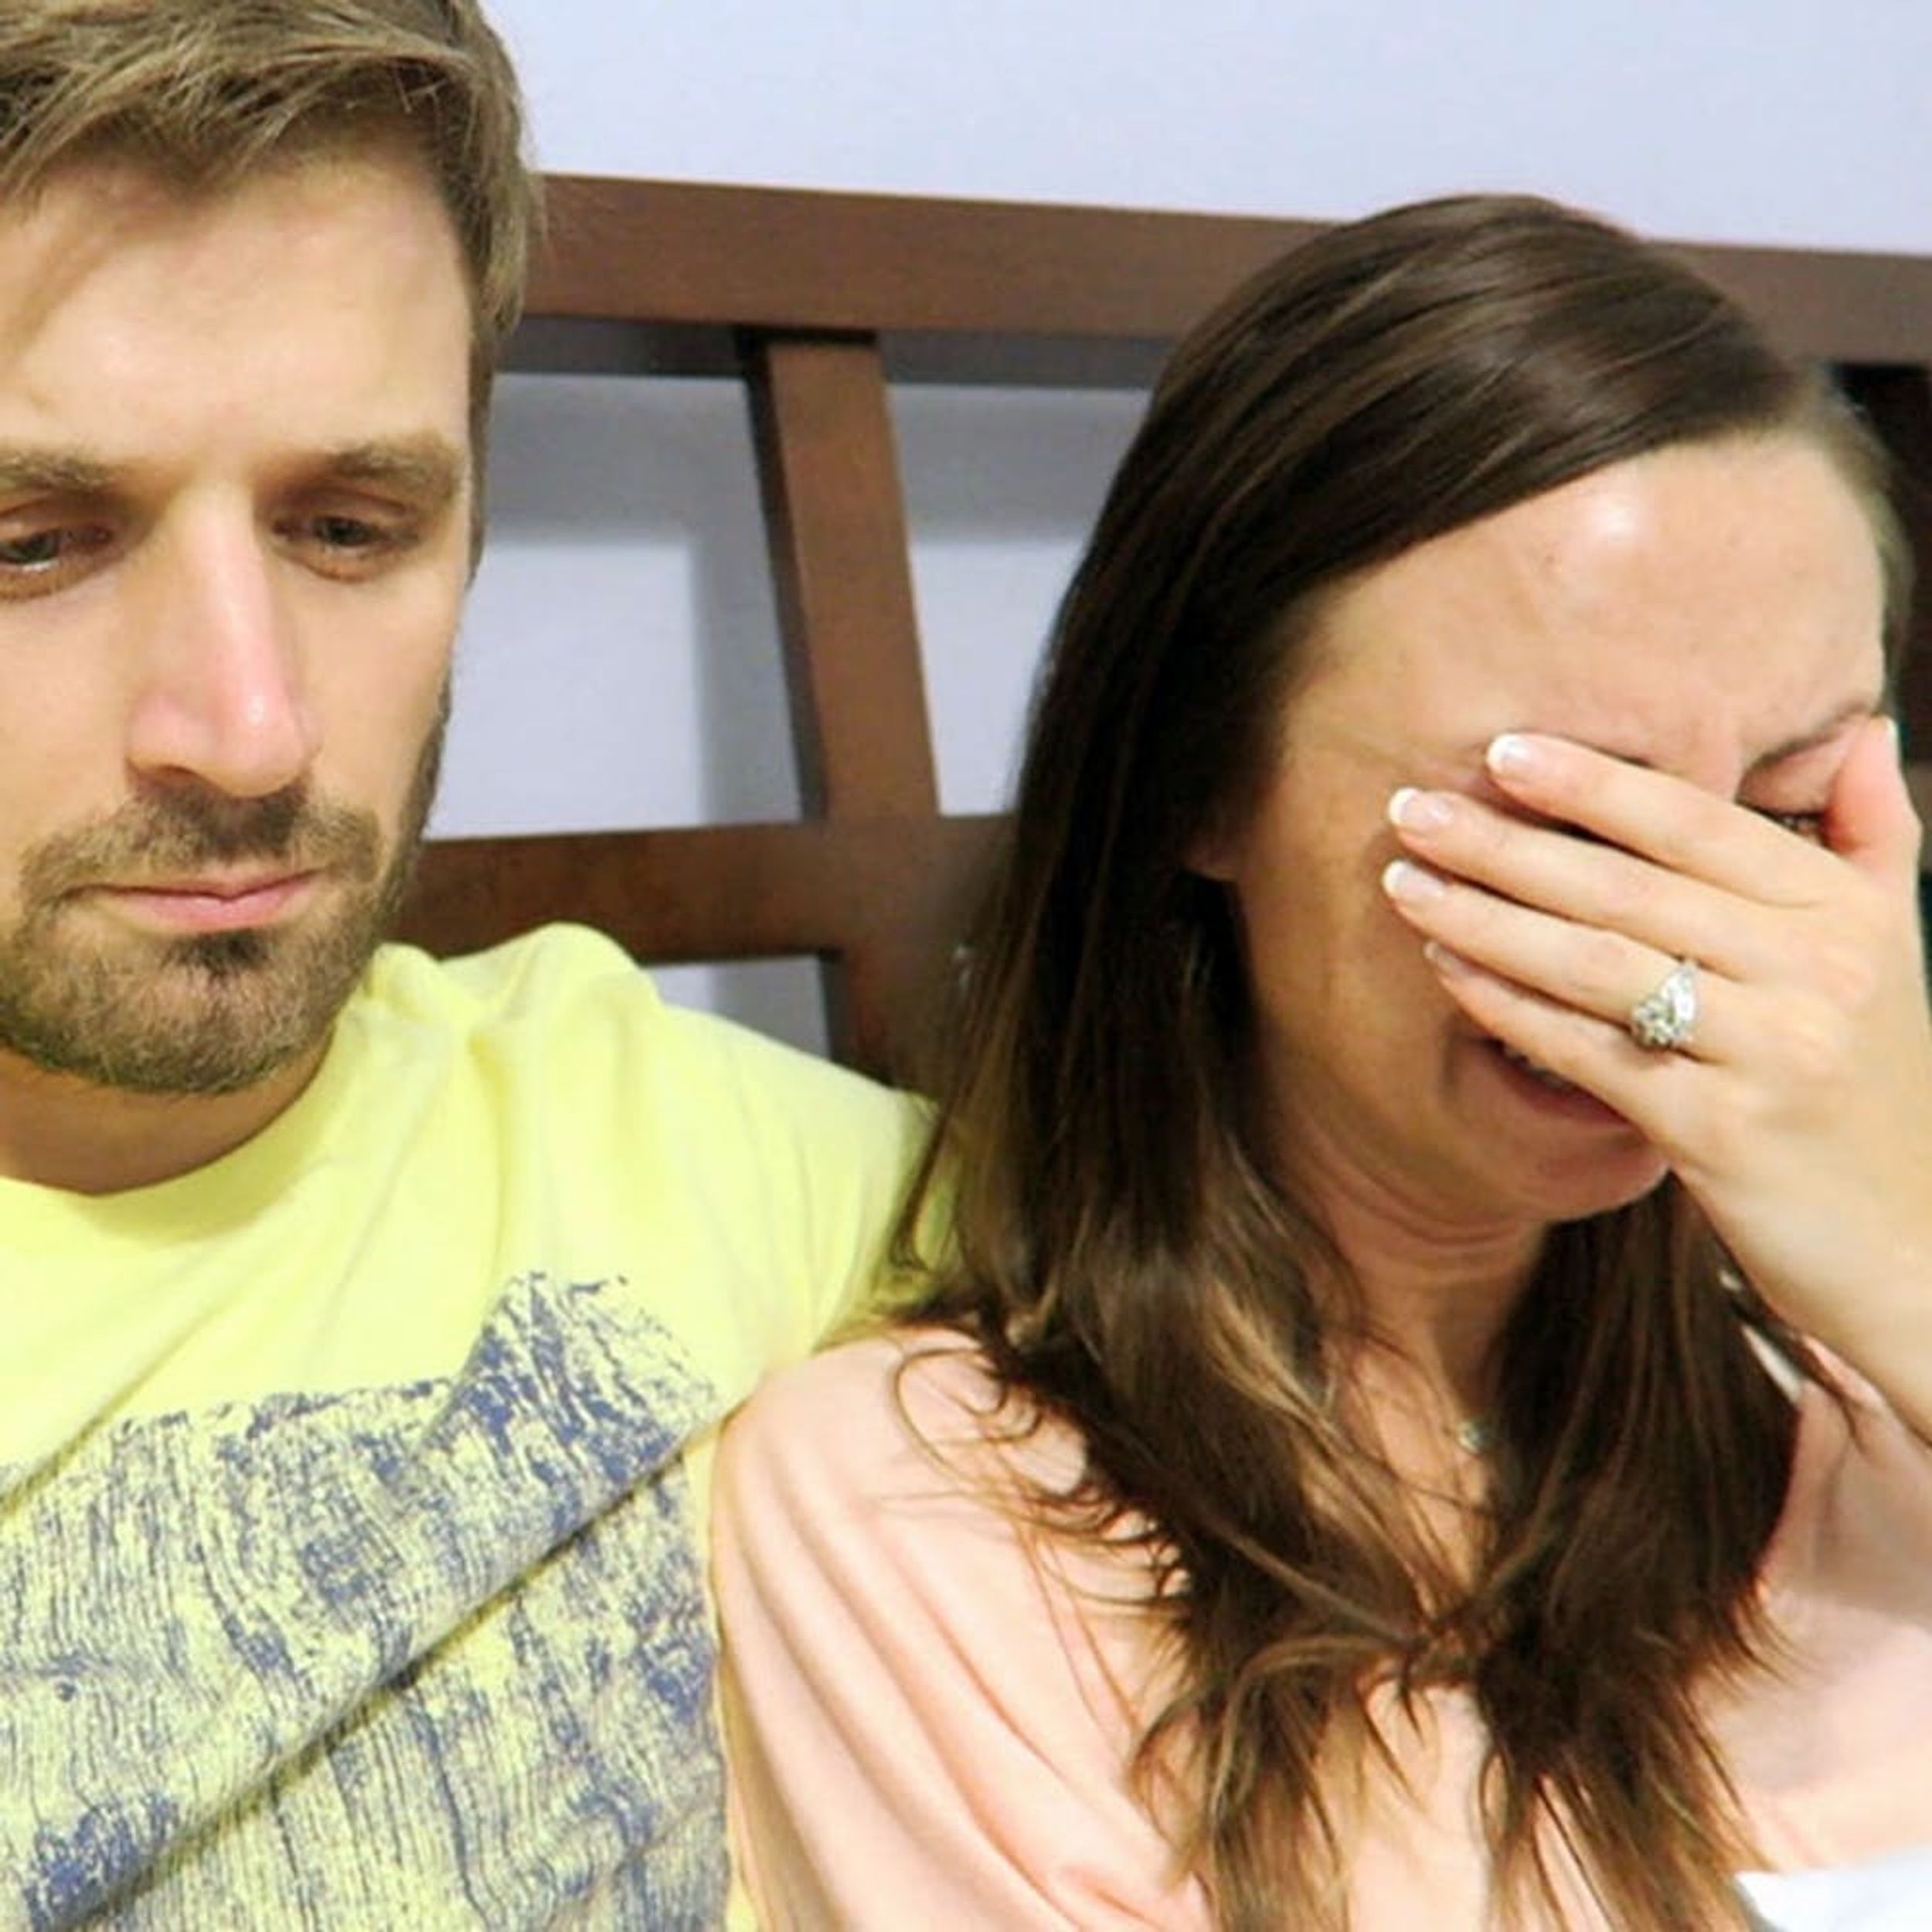 The Viral, Surprise Pregnancy Announcement YouTubers Reveal Heartbreaking News